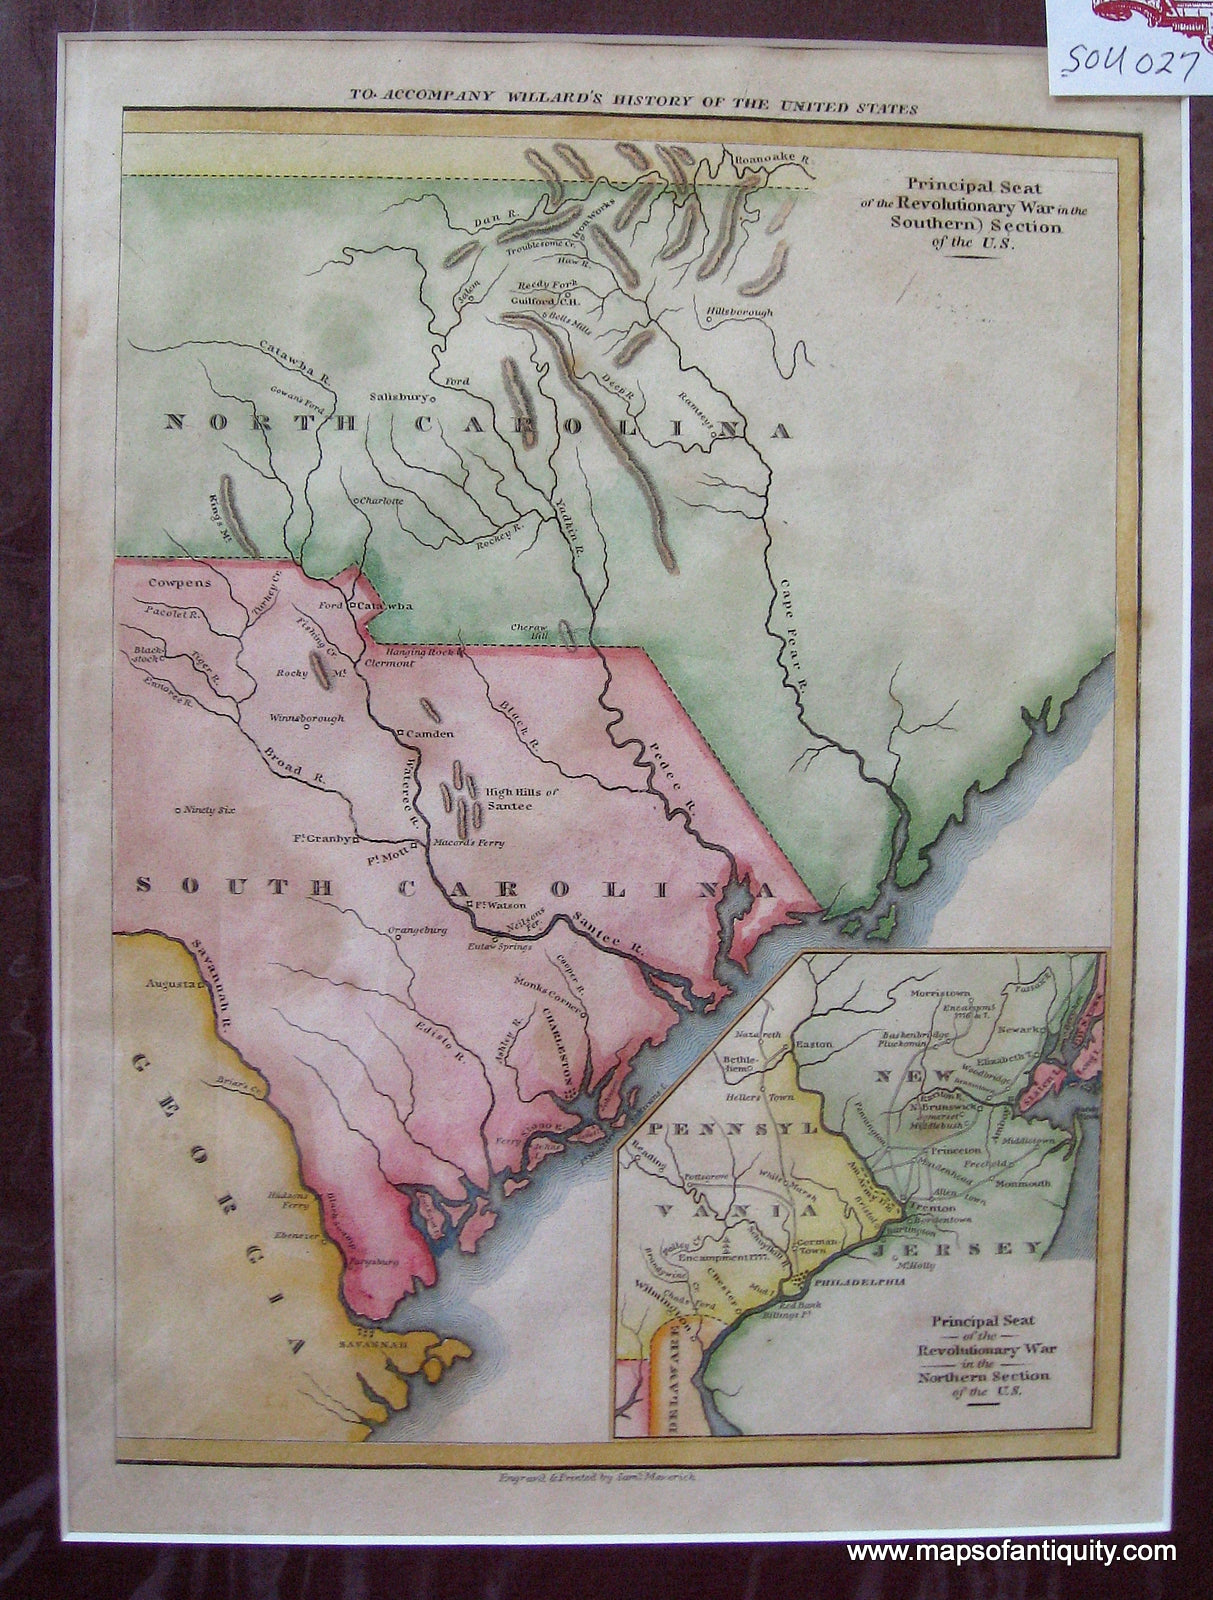 Antique-Hand-Colored-Map-Principal-Seat-of-the-Revolutionary-War-in-the-Southern-Section-of-the-U.S.--South-1829-Willard-Maps-Of-Antiquity